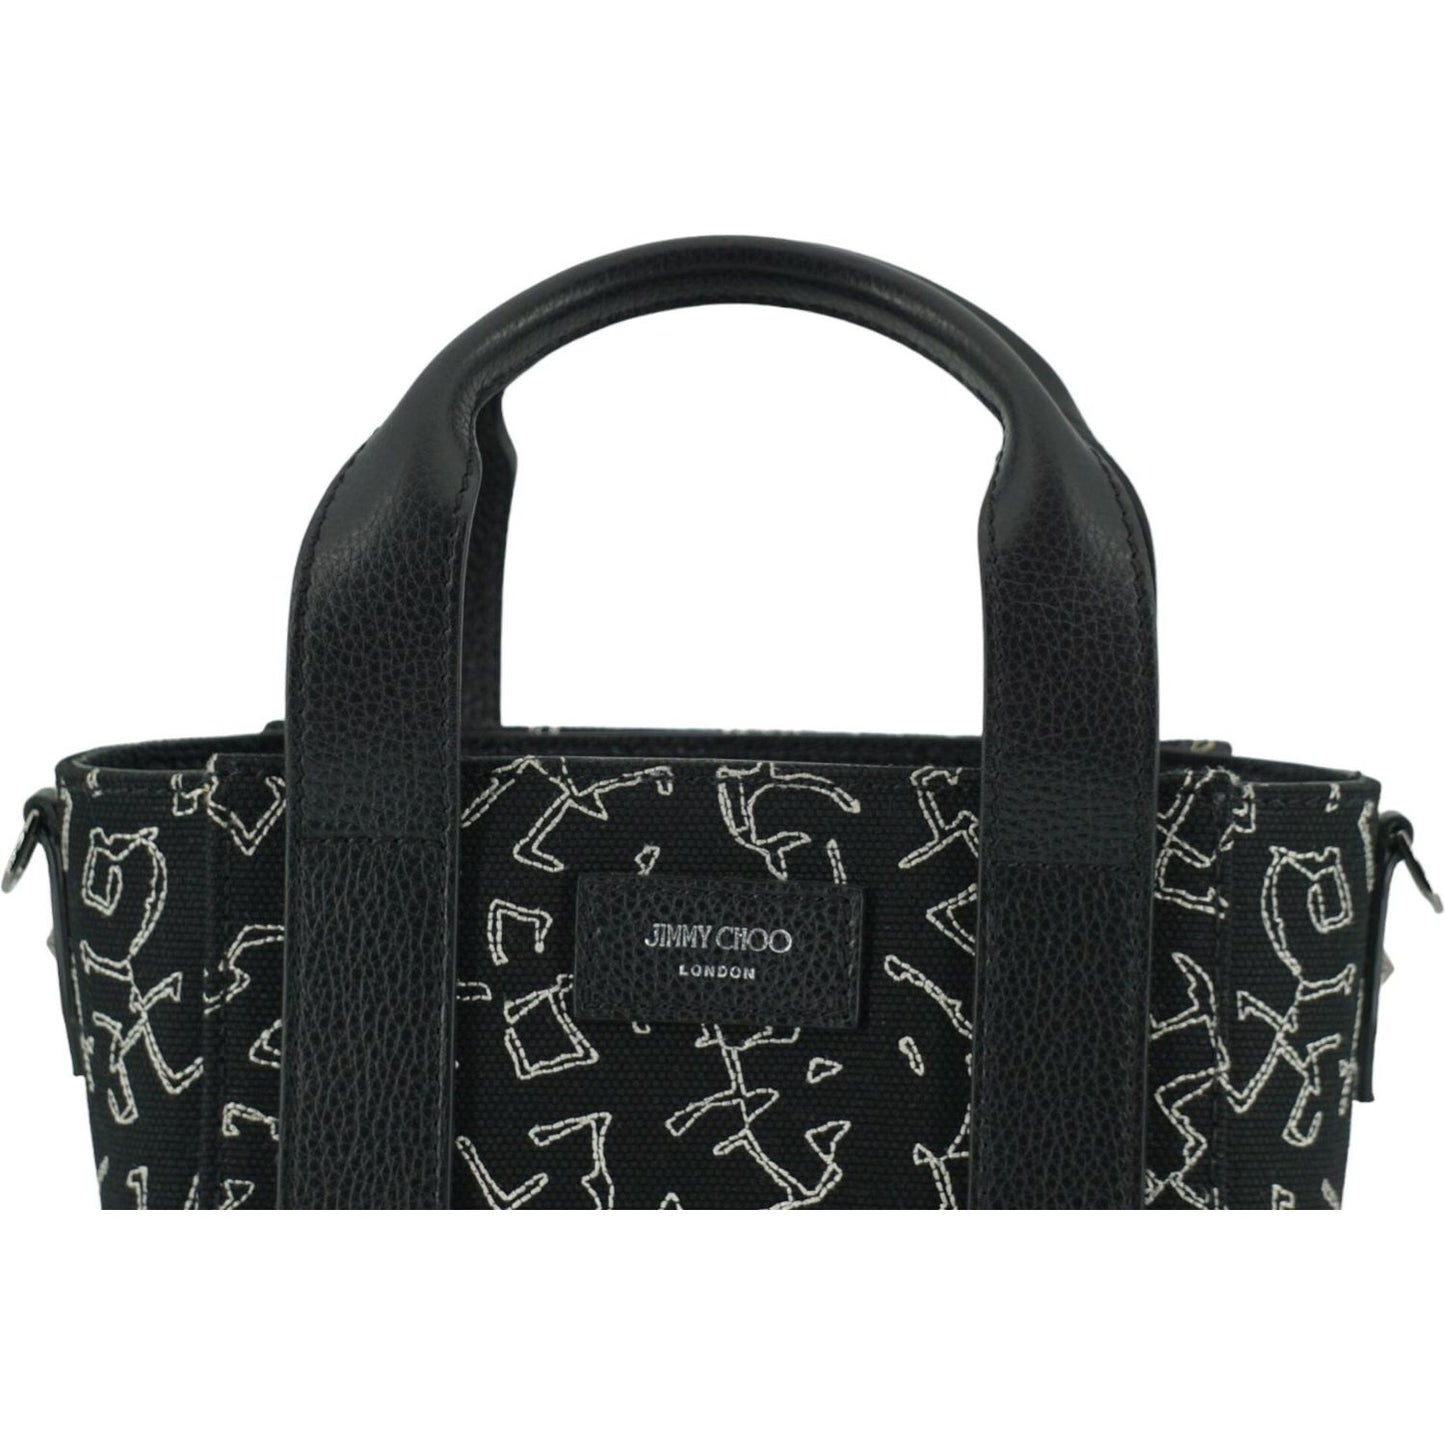 Jimmy Choo Black Leather and Canvas Small Tote Bag black-leather-and-canvas-small-tote-bag